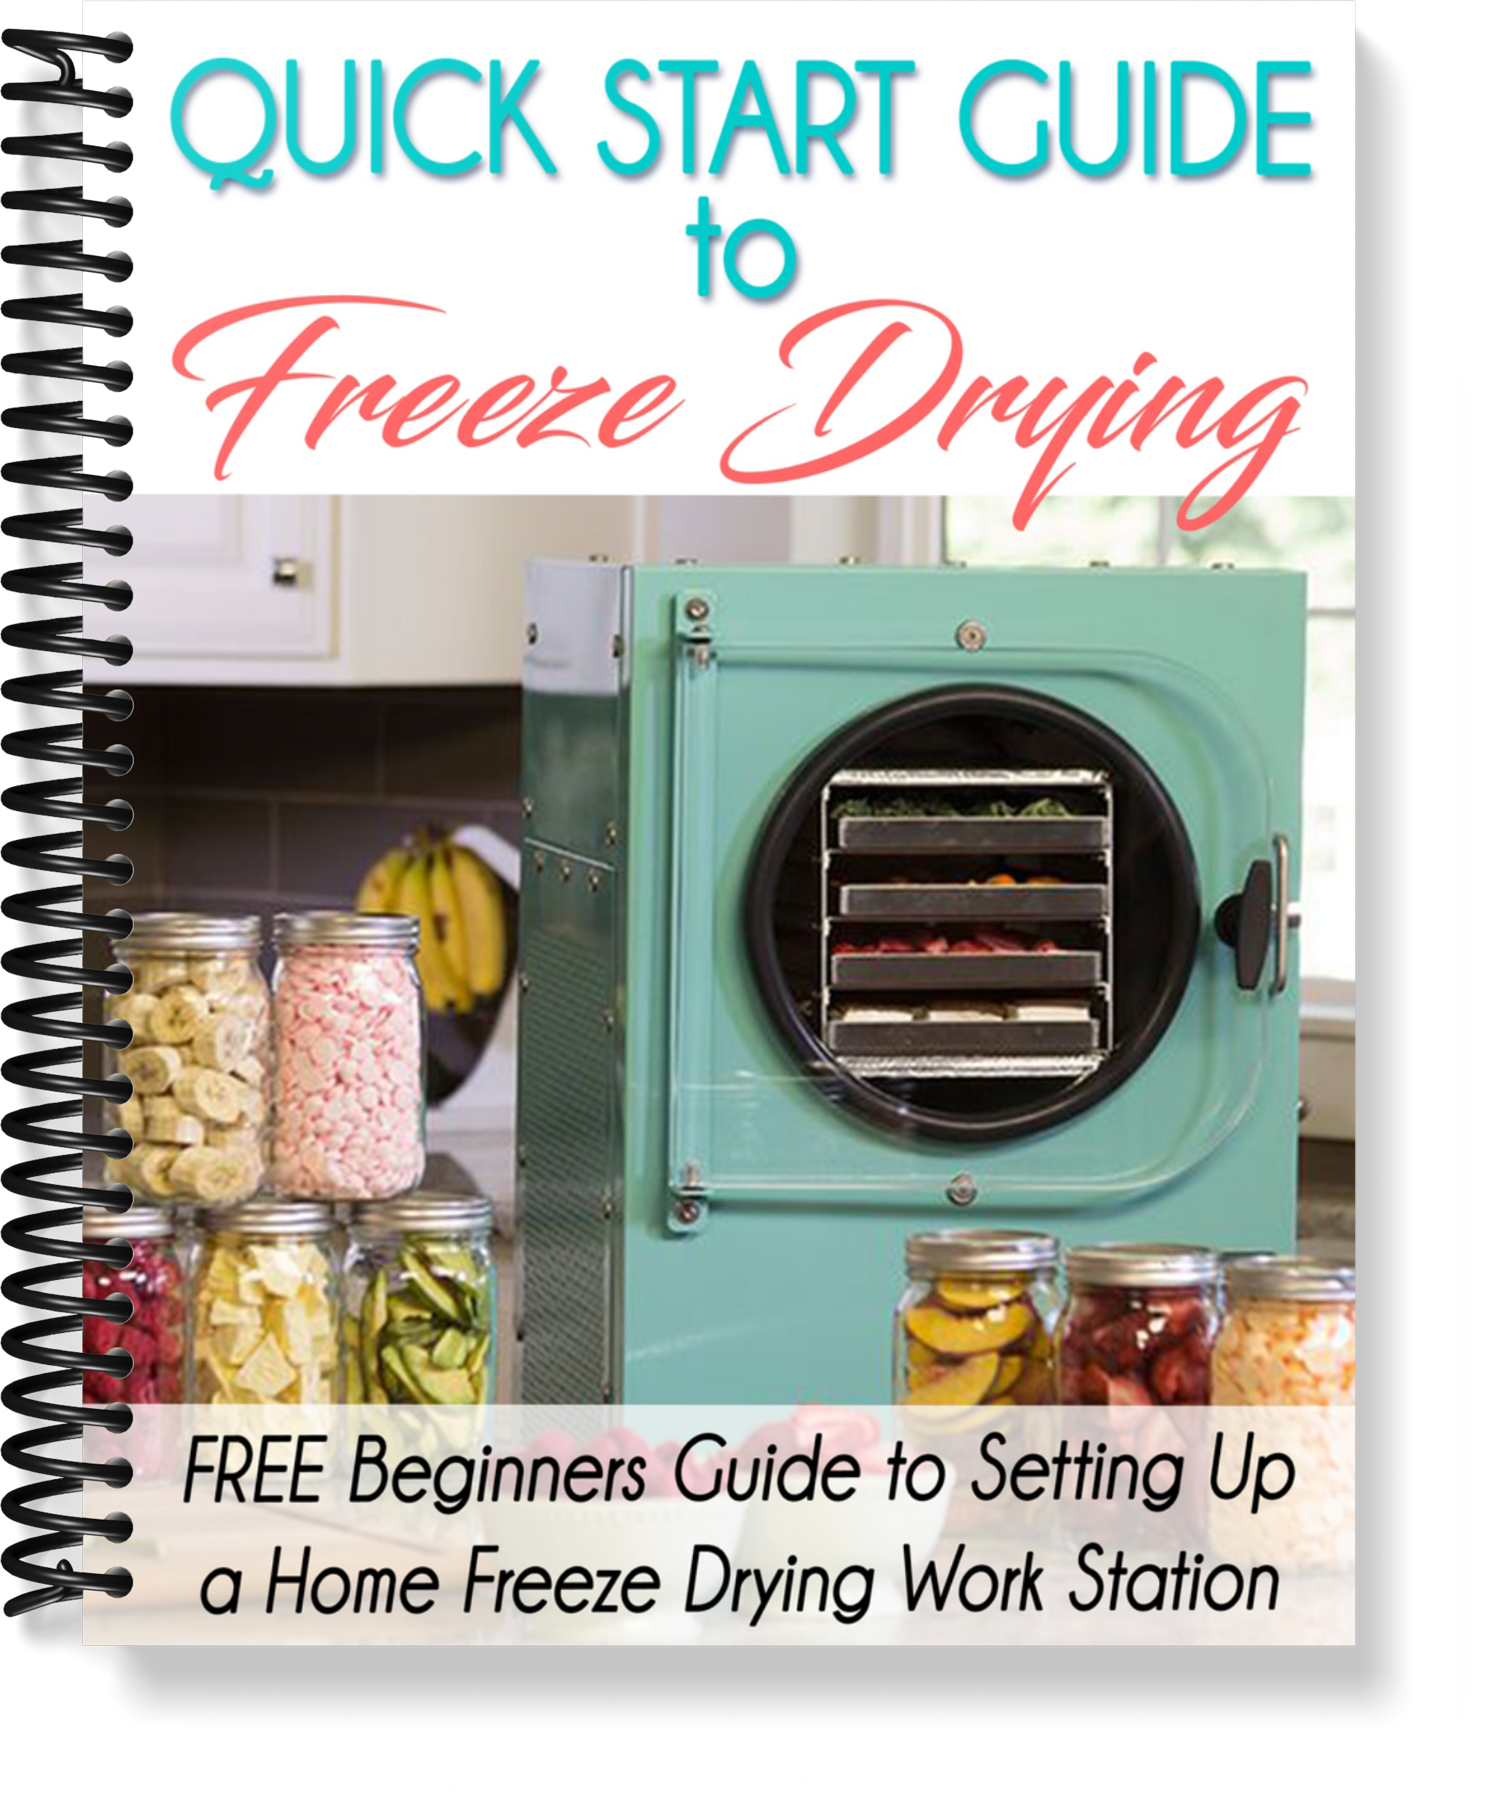 Quick Start Guide to Freeze Drying